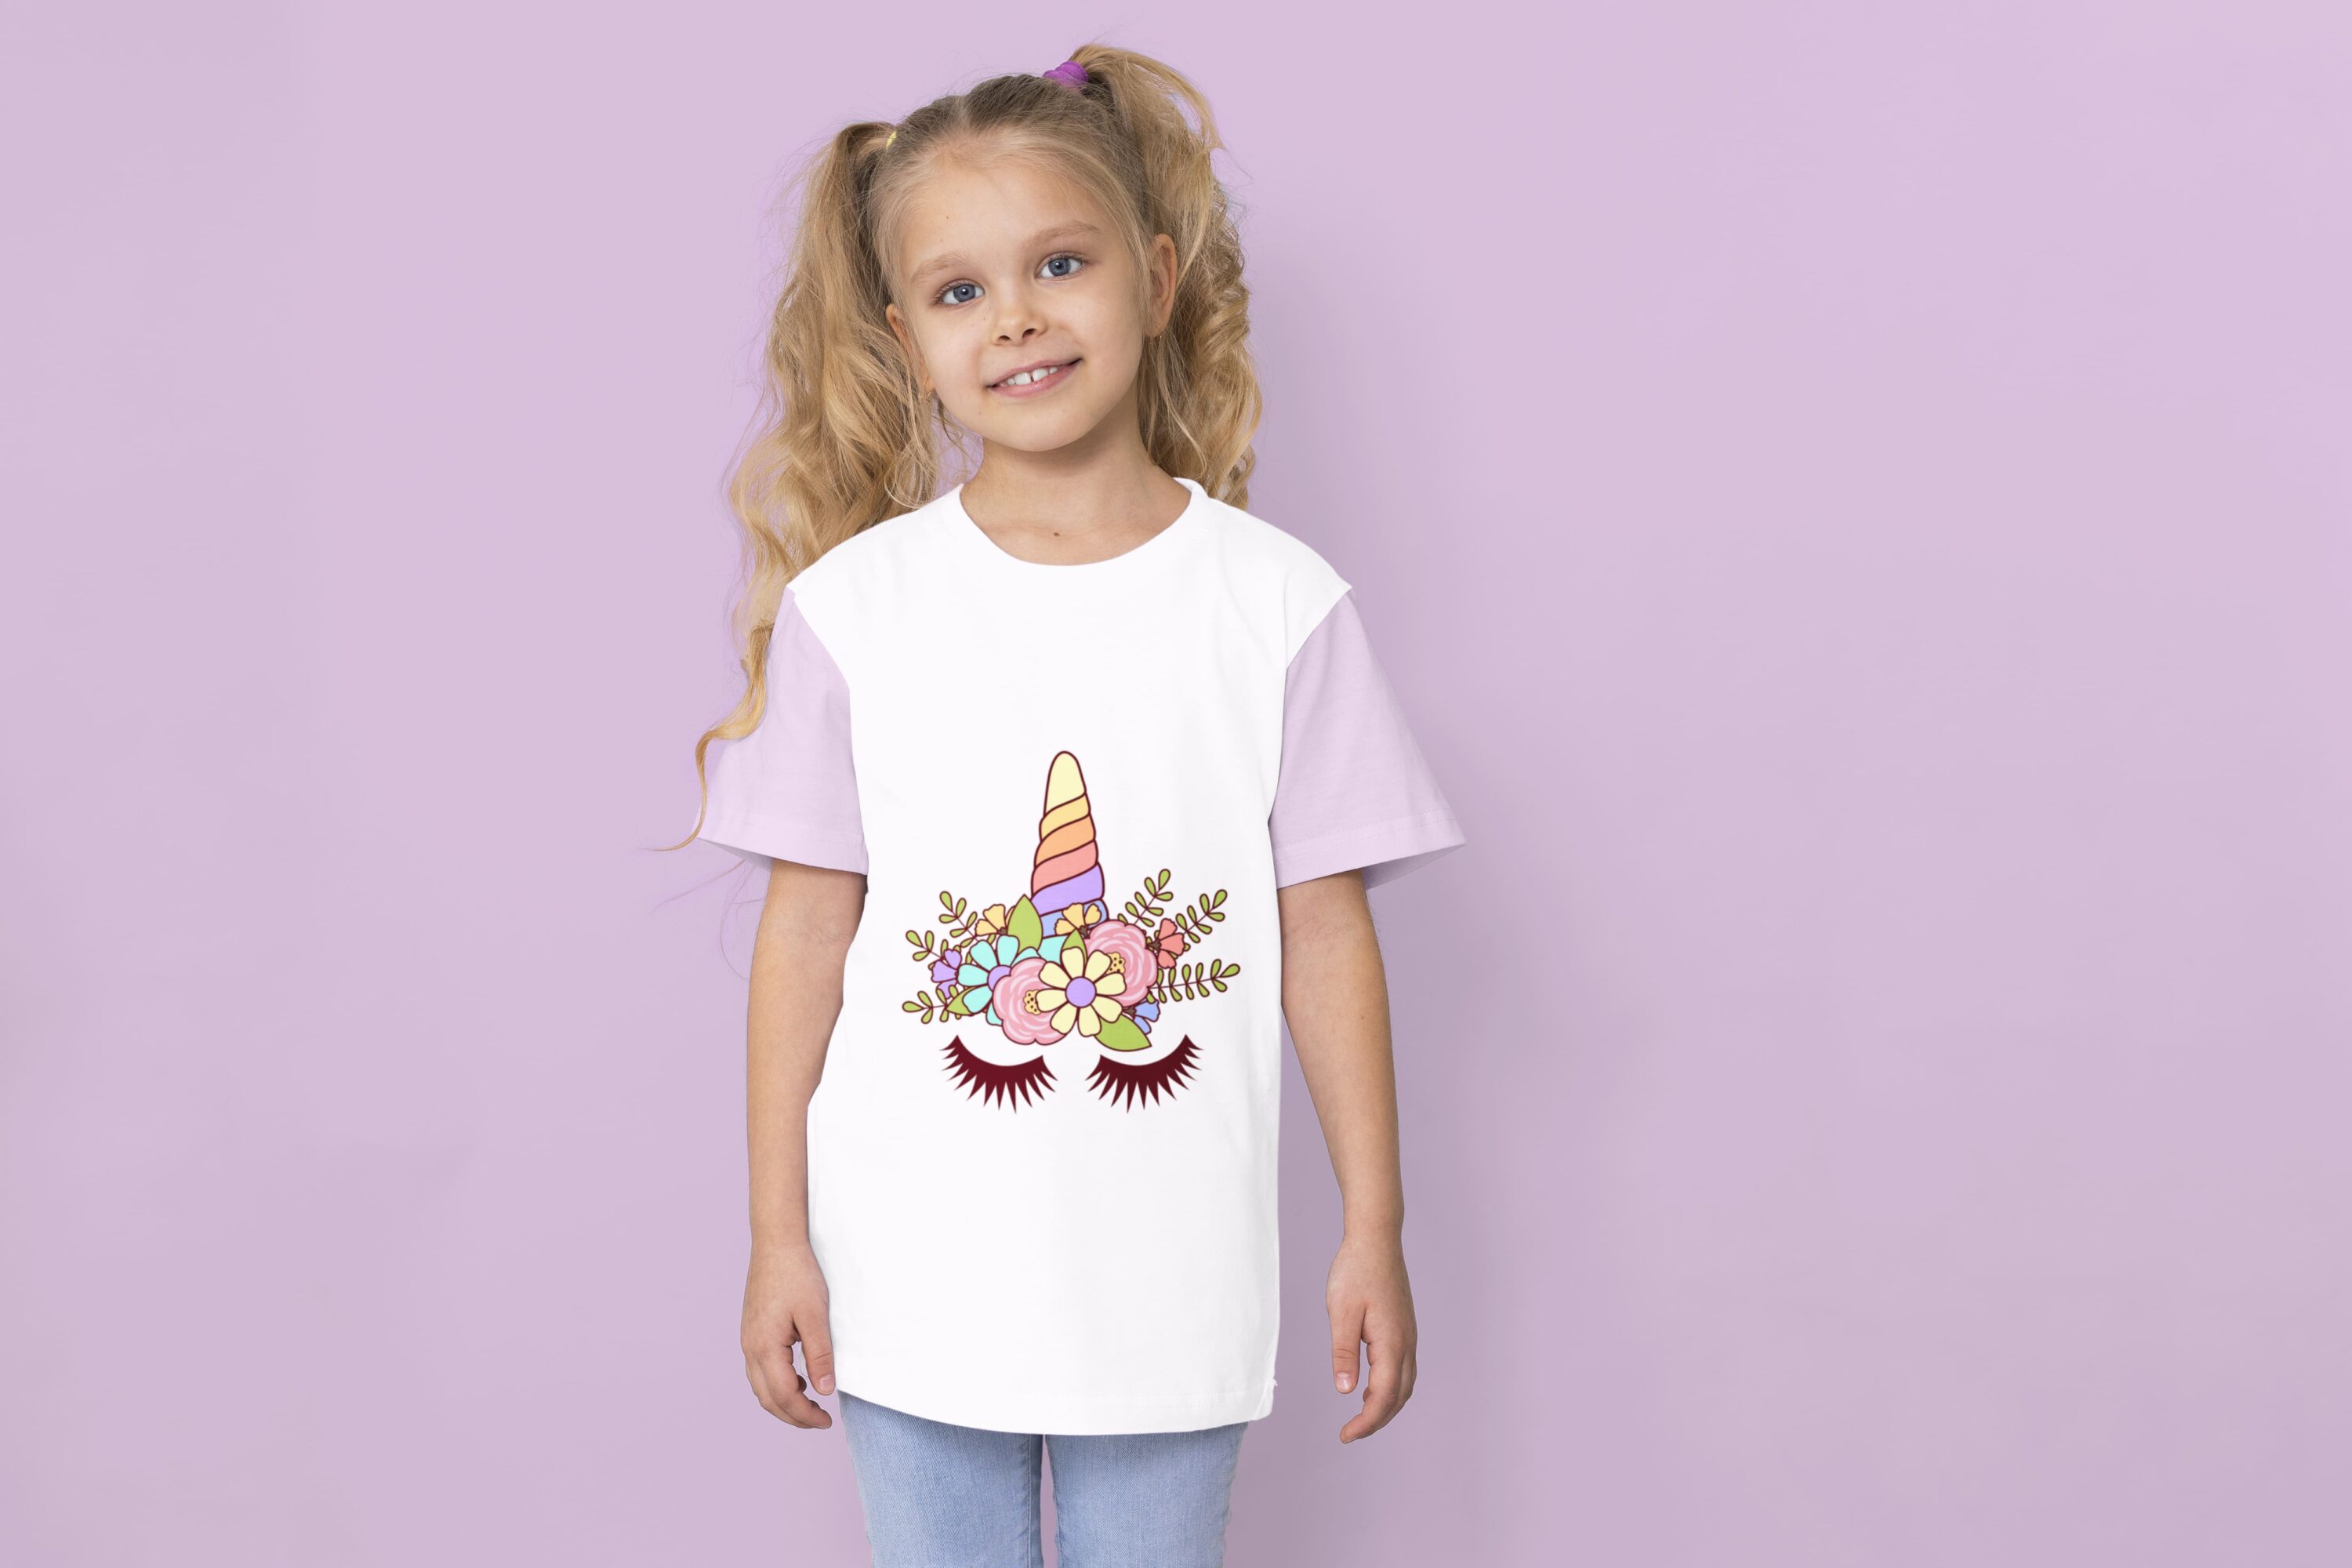 A white t-shirt with lavender sleeves and a colorful unicorn horn with closed eyes on a girl against a lavender background.